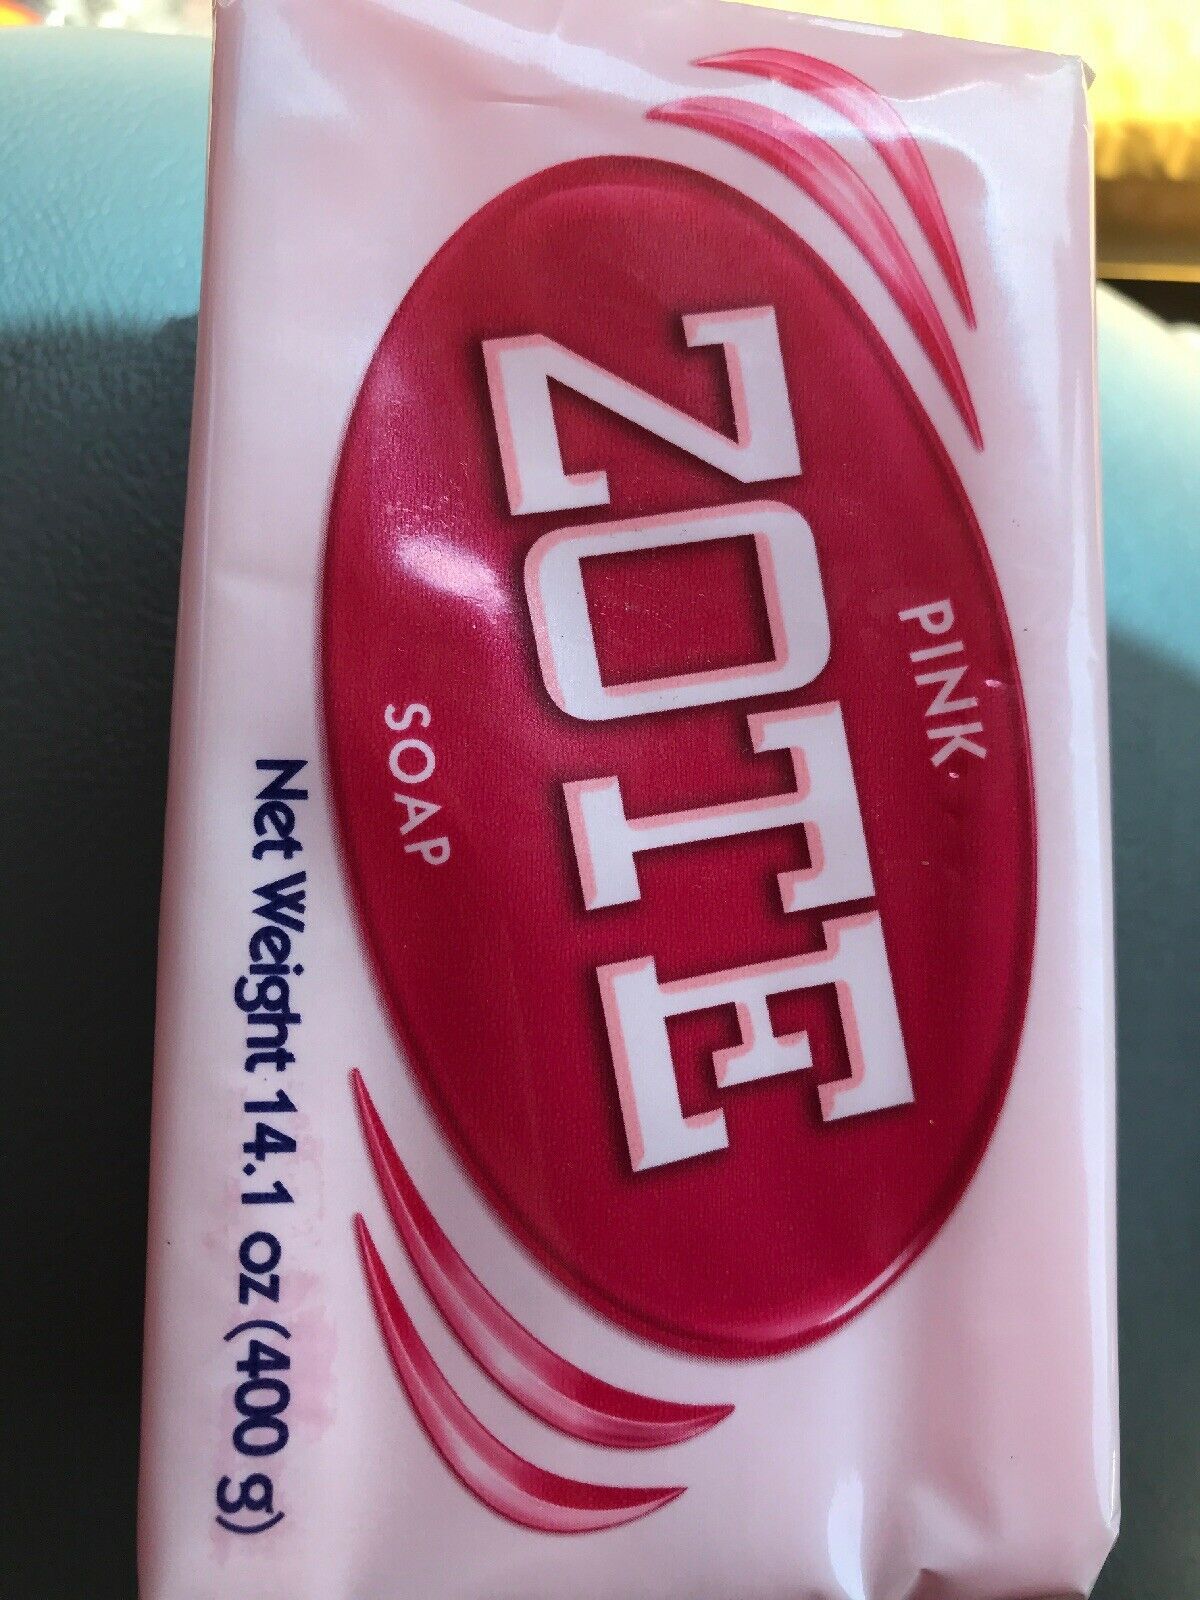 5x Zote Pink Soap (5) Large Bars 14.1oz per Hand Wash Soap for Stains ...